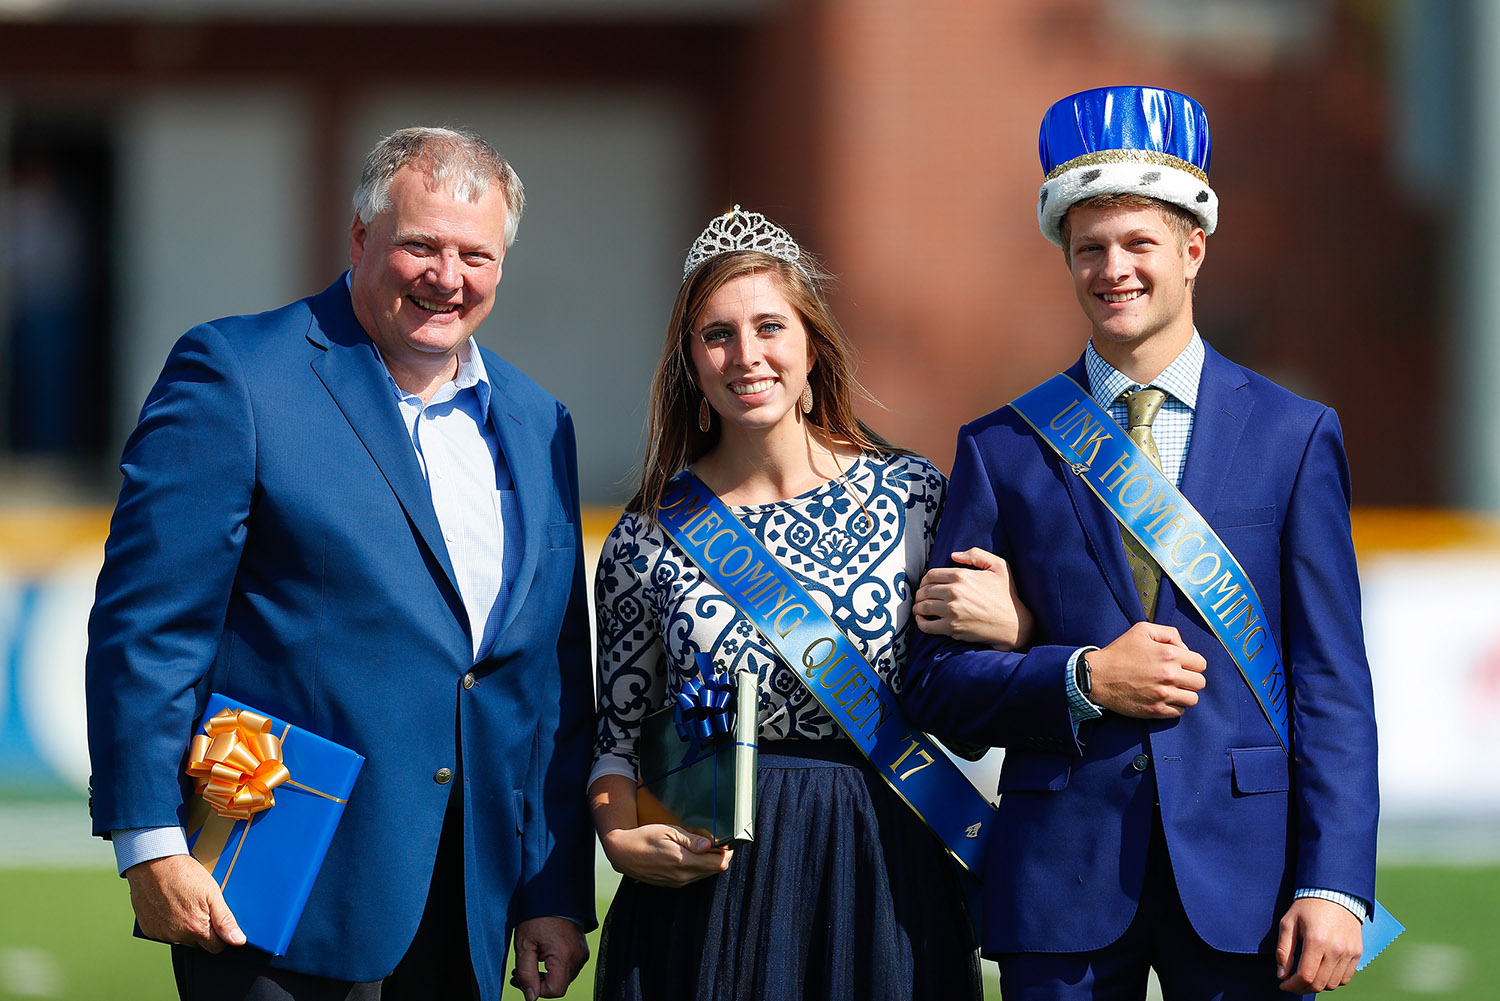 Logan Krejdl, right, was voted UNK homecoming king in fall 2017. He’s pictured with UNK Chancellor Doug Kristensen and 2017 homecoming queen Miranda Ketteler.